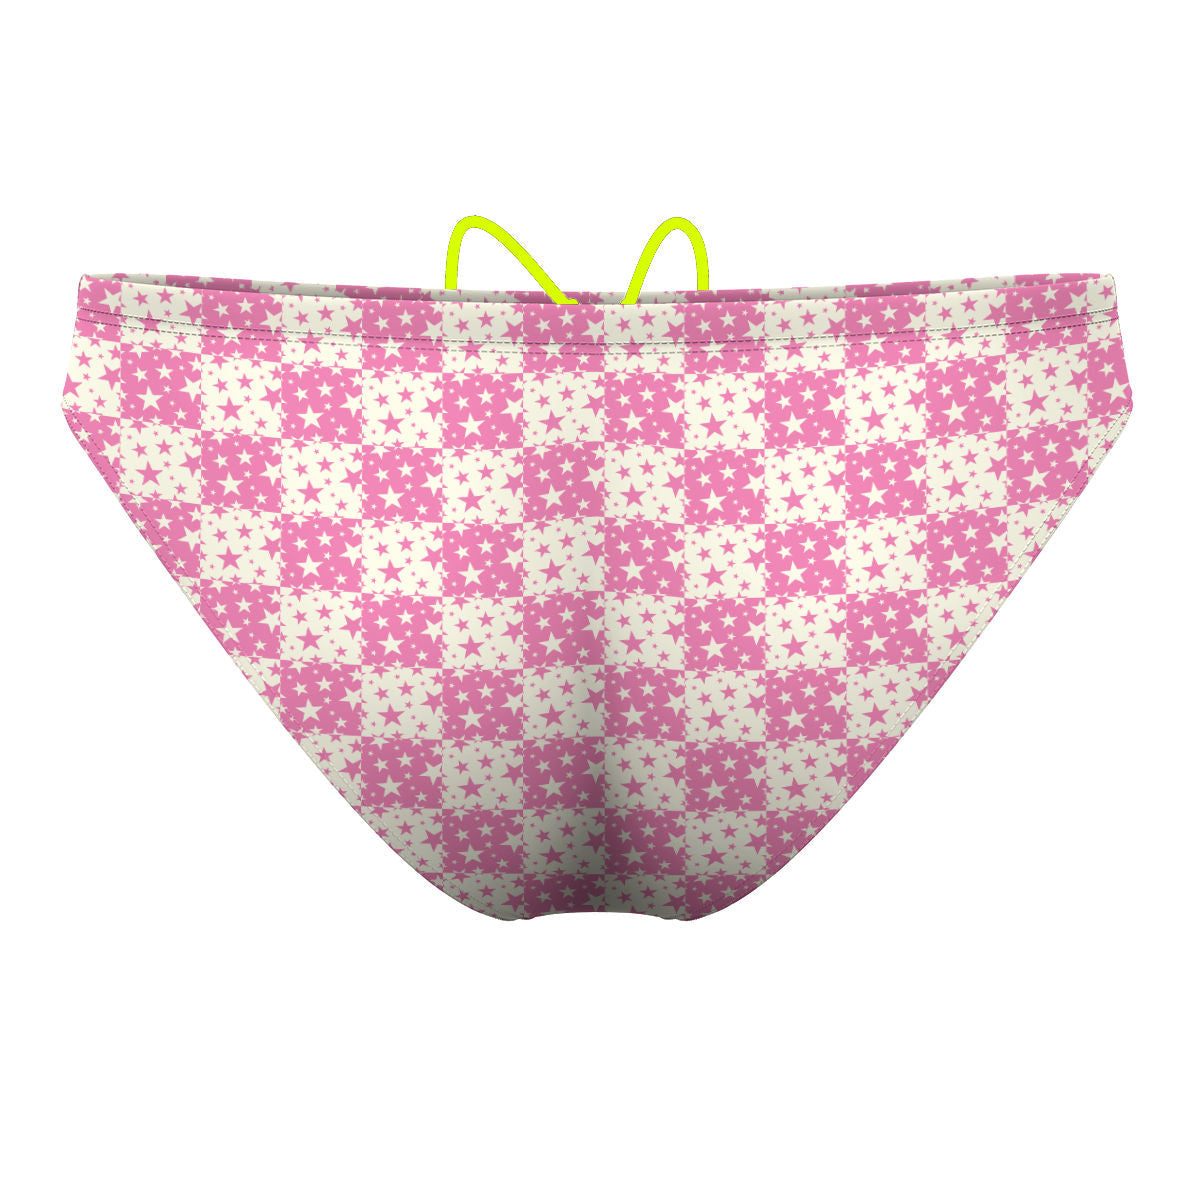 Pink Plaid Stars - Waterpolo Brief Swimsuit